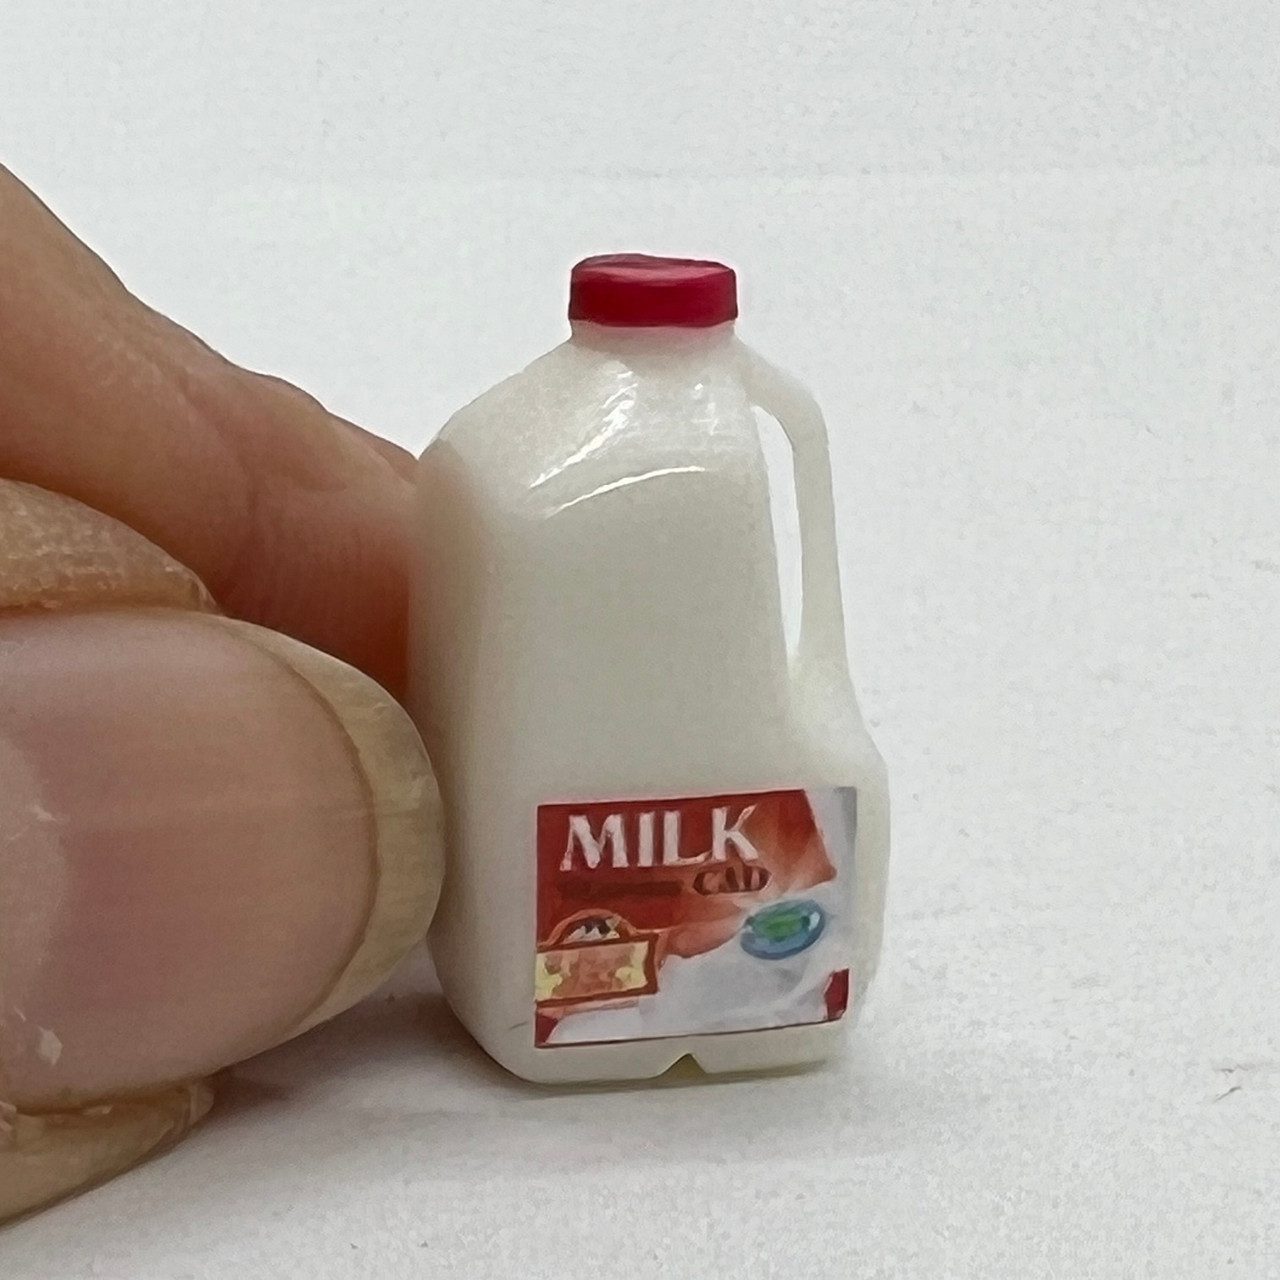 Milk, Gallon (CIMIG102) with fingers for scale